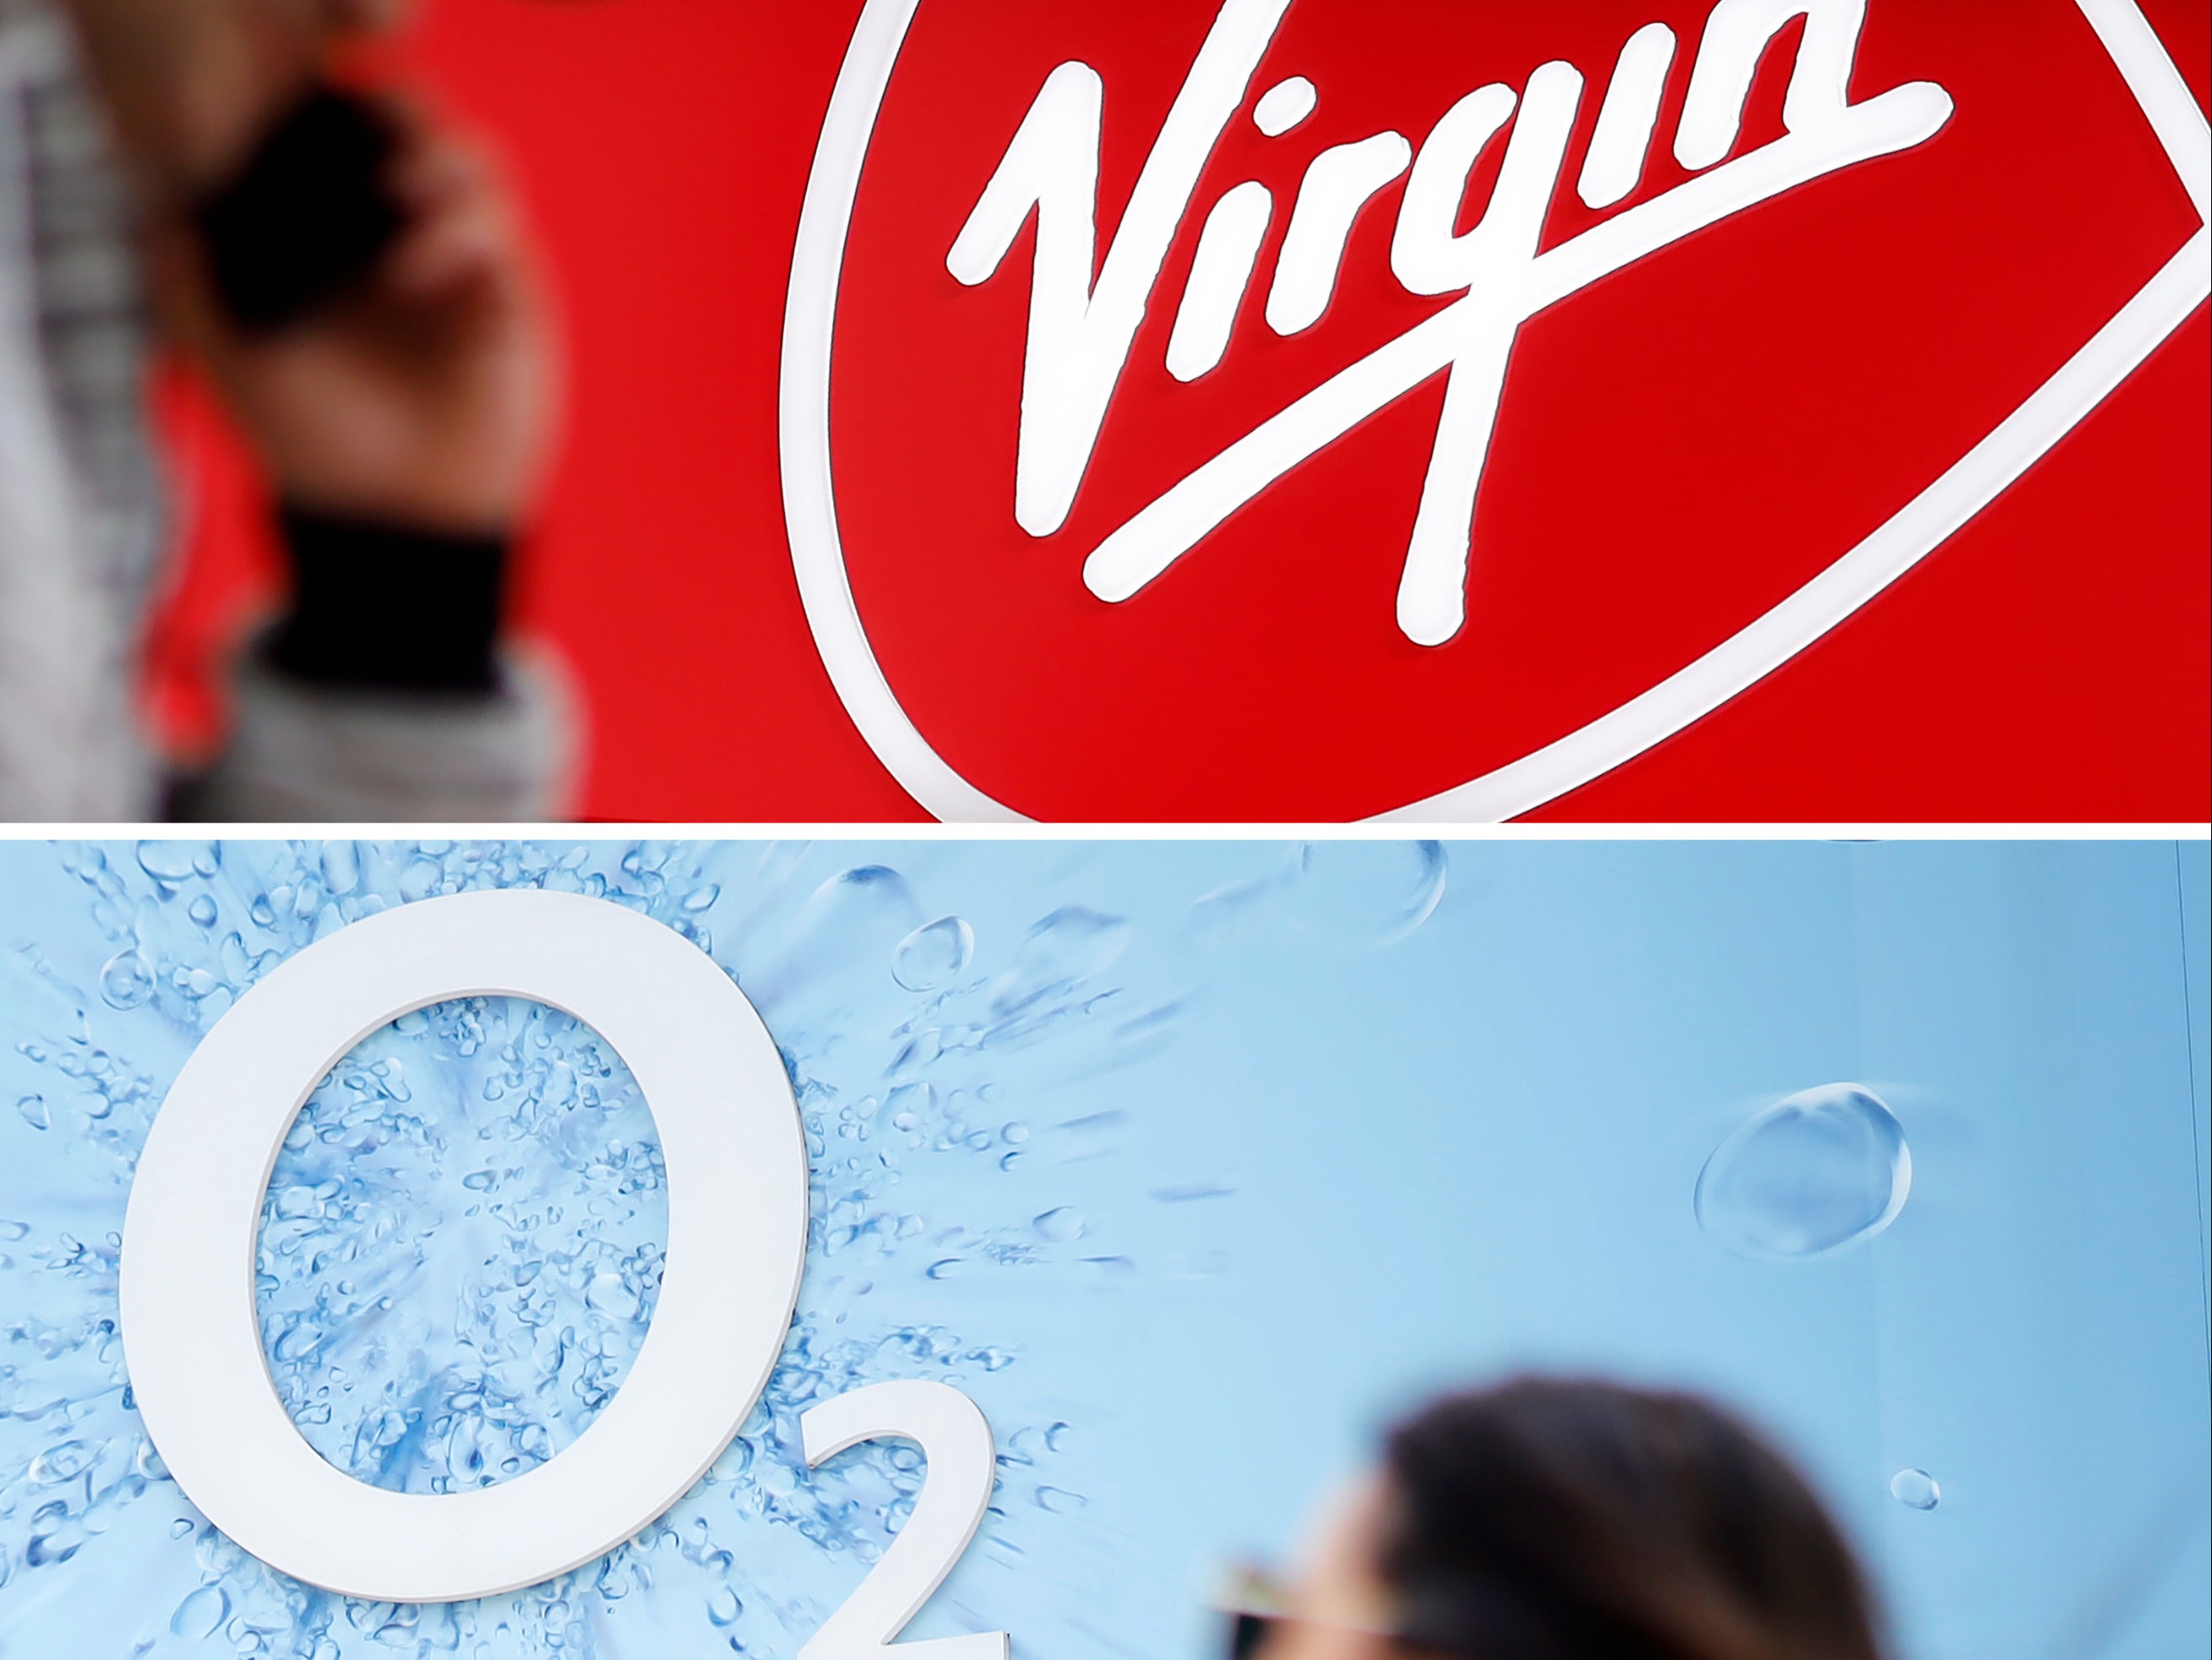 Virgin Media O2 will pay for gender transition treatment for transgender and non-binary employees